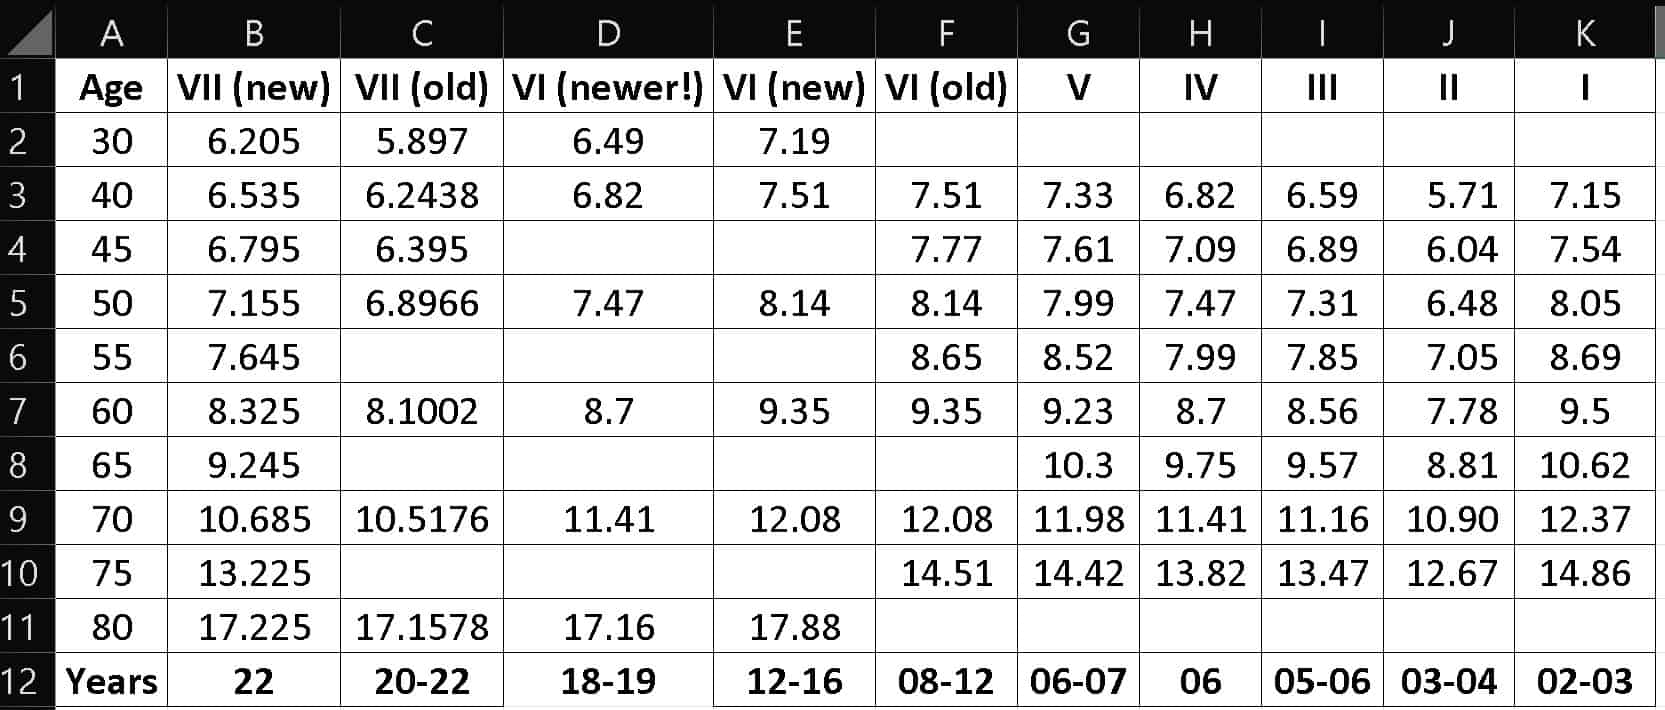 Table shows LIC annuity rates over the last 20 years for different Jeevan Akshay policies